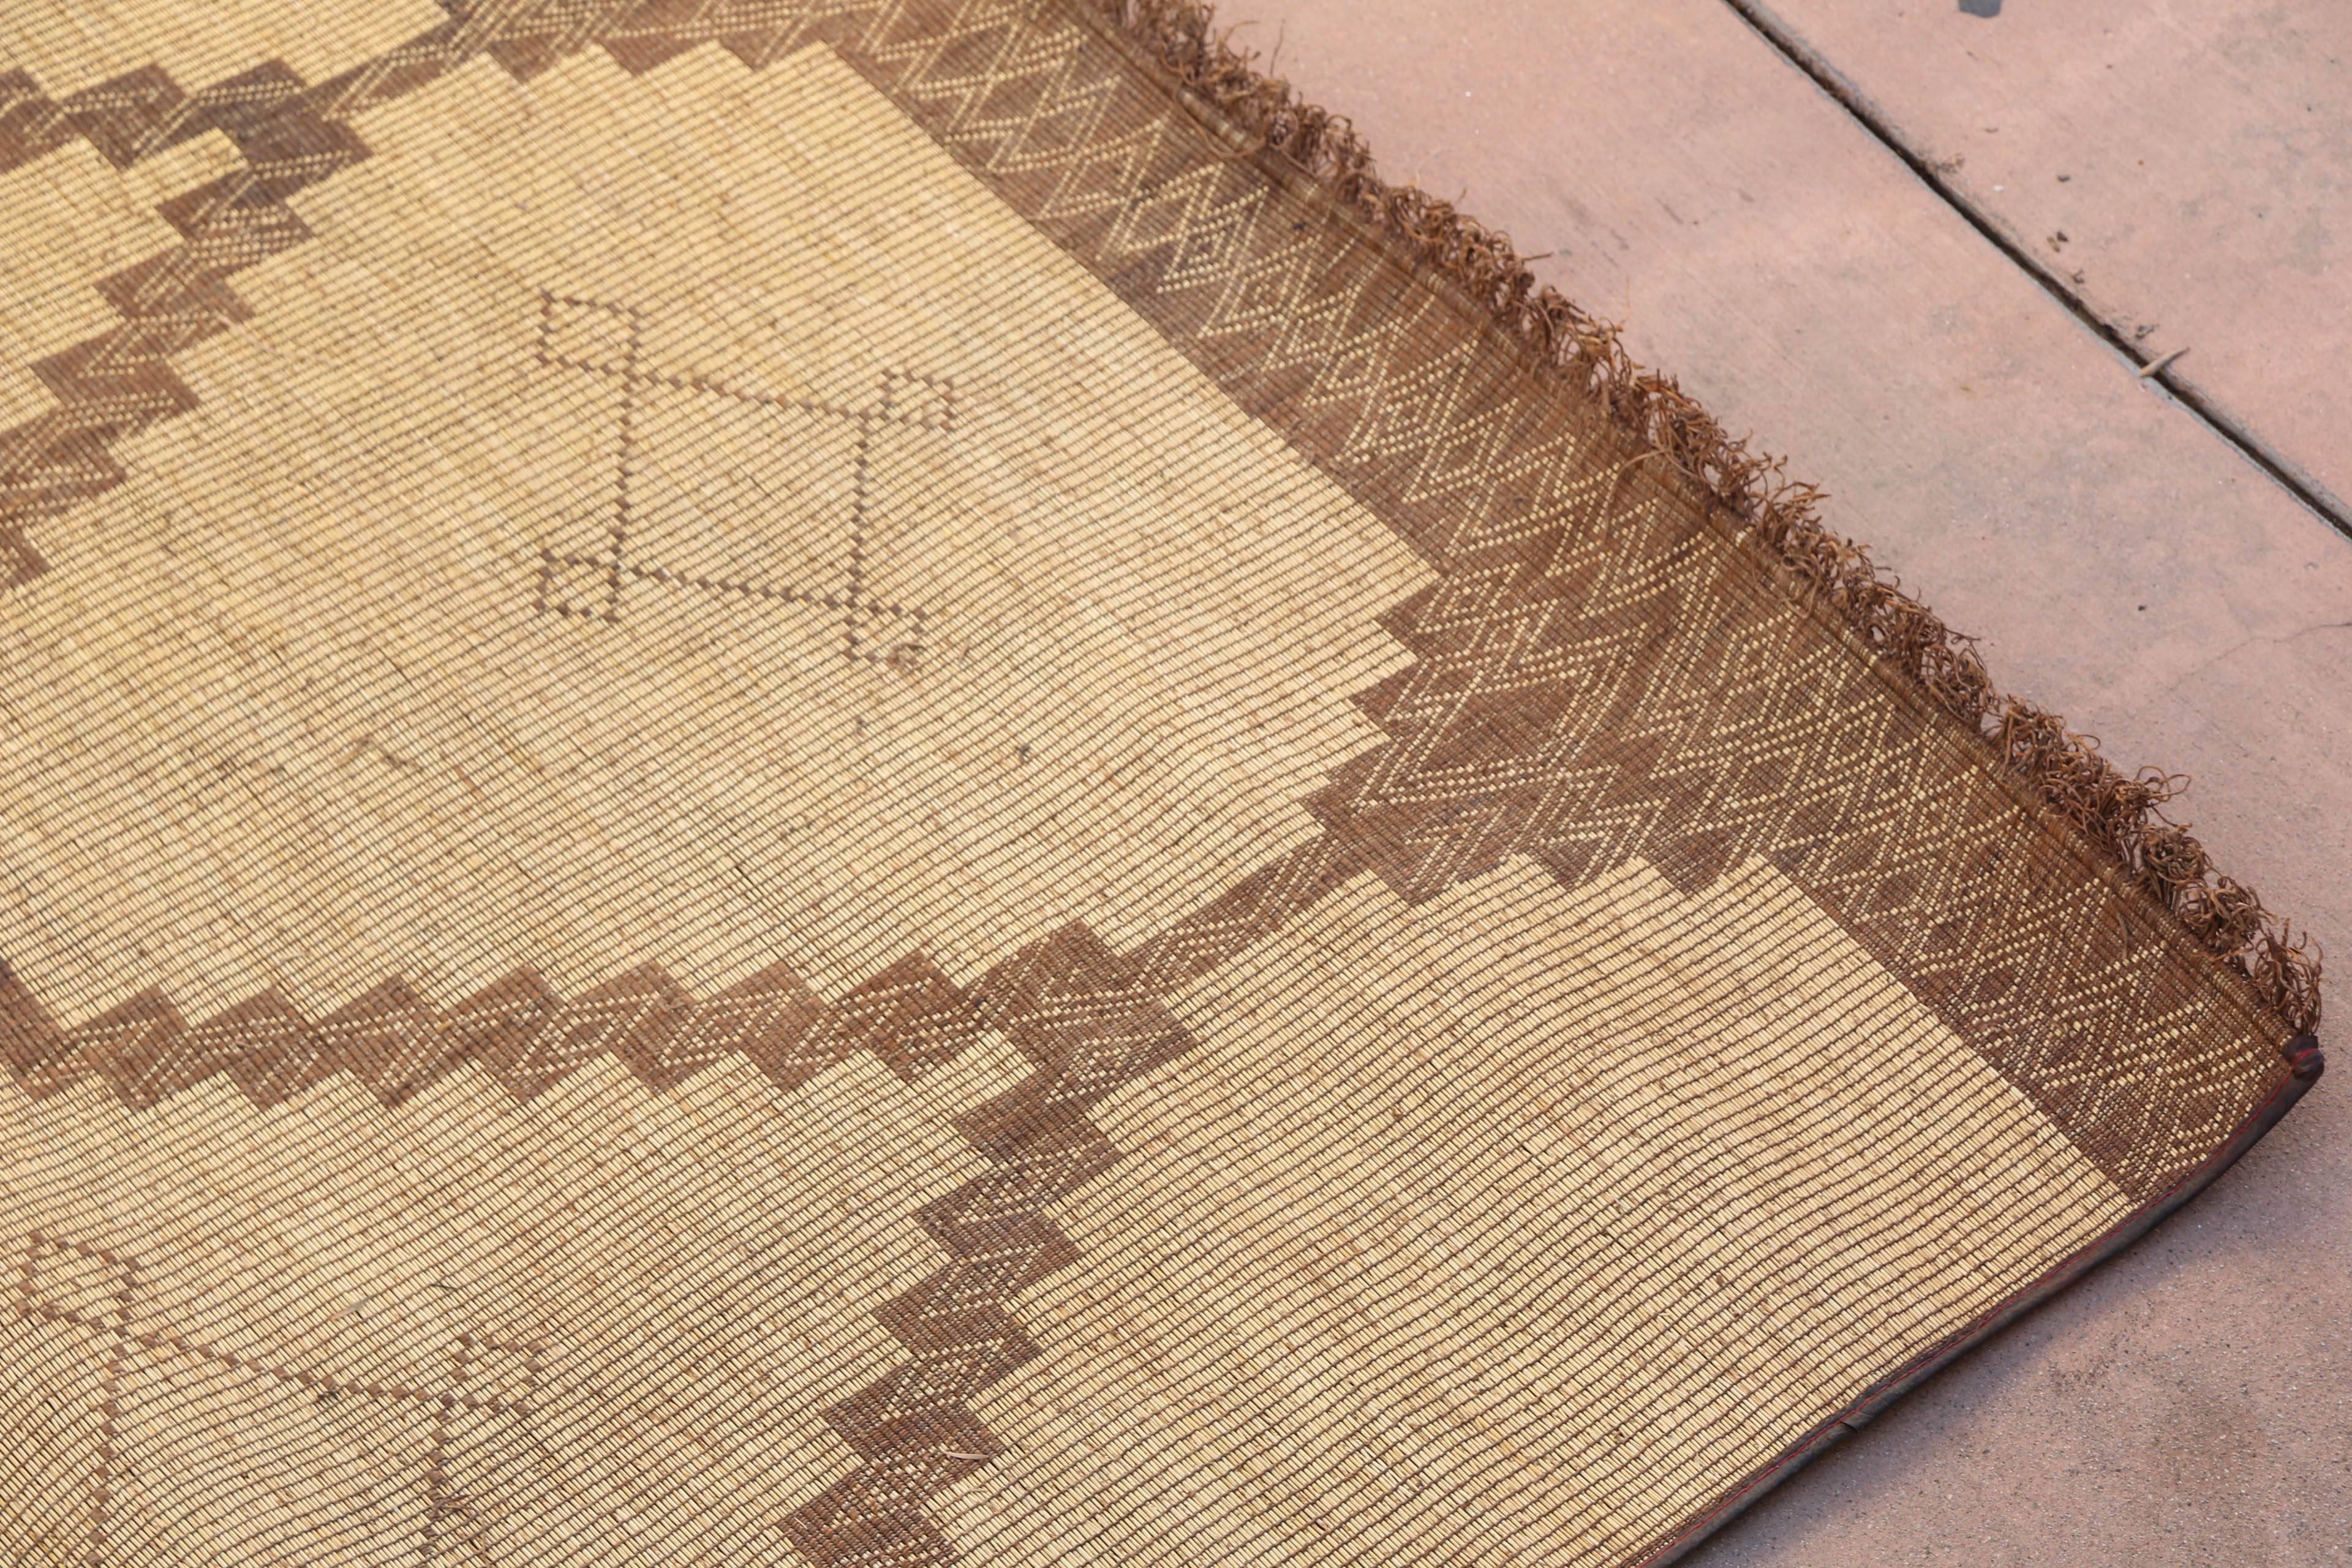 Moroccan Tuareg leather mats are made of dwarf palm tree fibers and handwoven with leather stripes, this are great to use indoor or outdoor, beautiful brown earth-tone colors. This vintage midcentury carpets are made in the desert of Morocco near